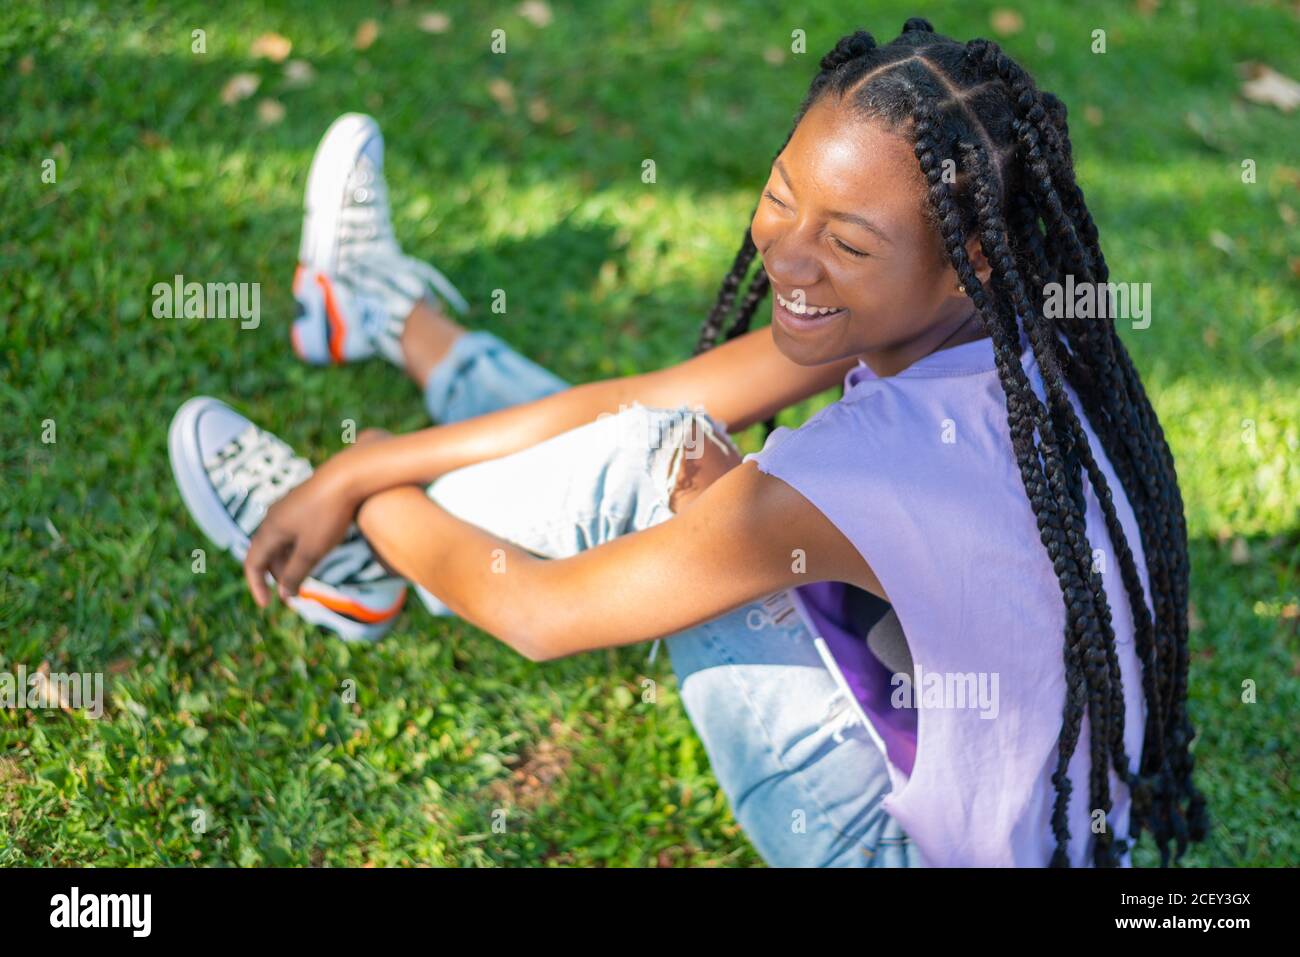 From above side view of happy young African American Woman with braids wearing casual clothes sitting on green grass and laughing while enjoying summer day in park Stock Photo